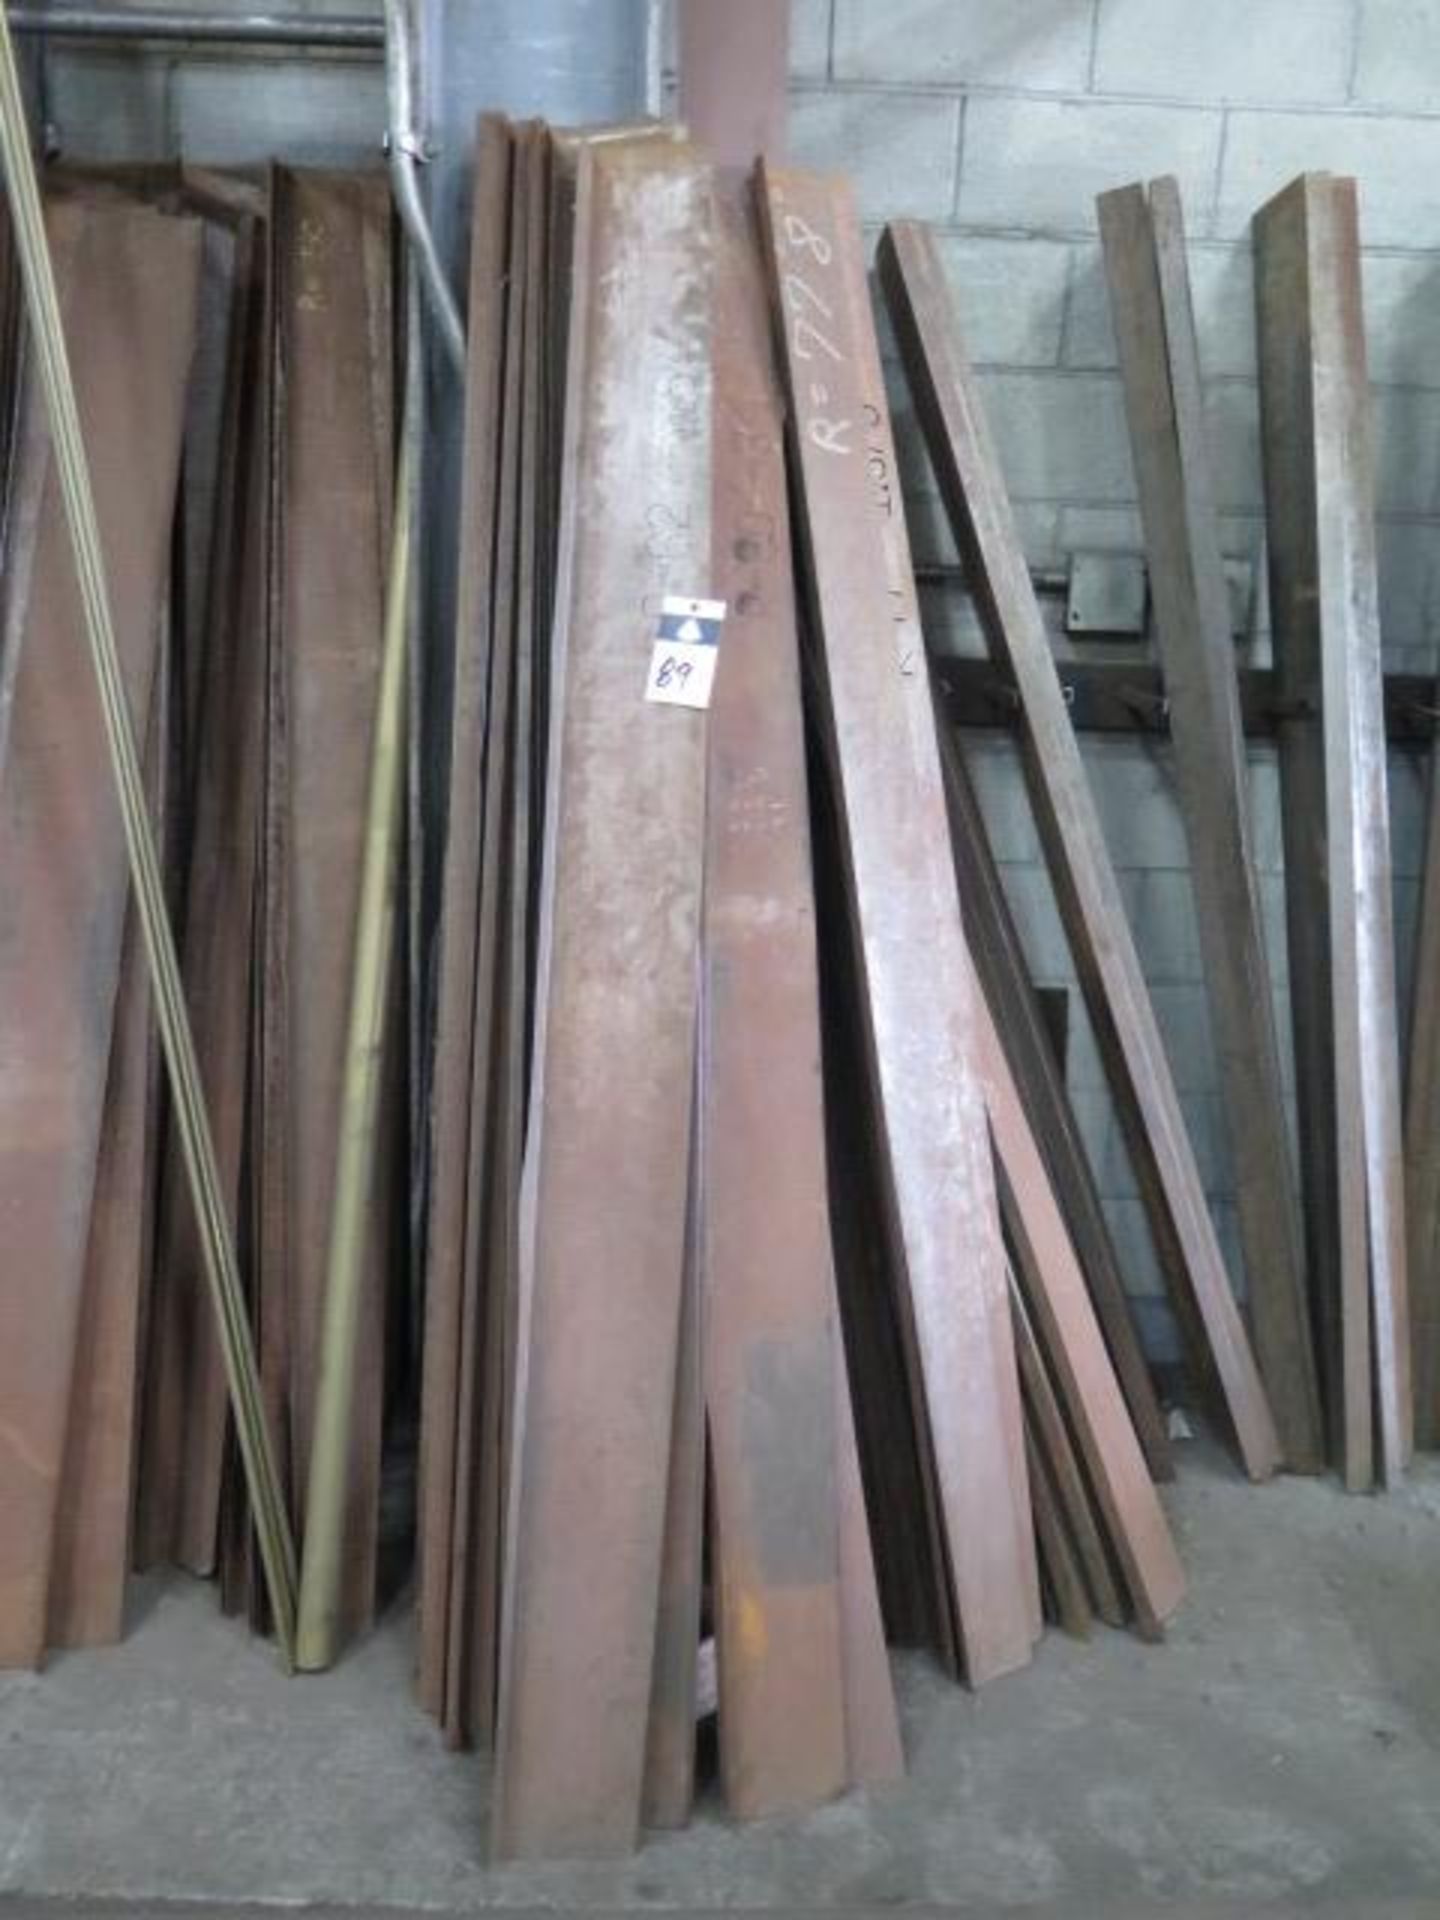 Lrge Quantity of Steel Radius Templates (SOLD AS-IS - NO WARRANTY) - Image 2 of 7